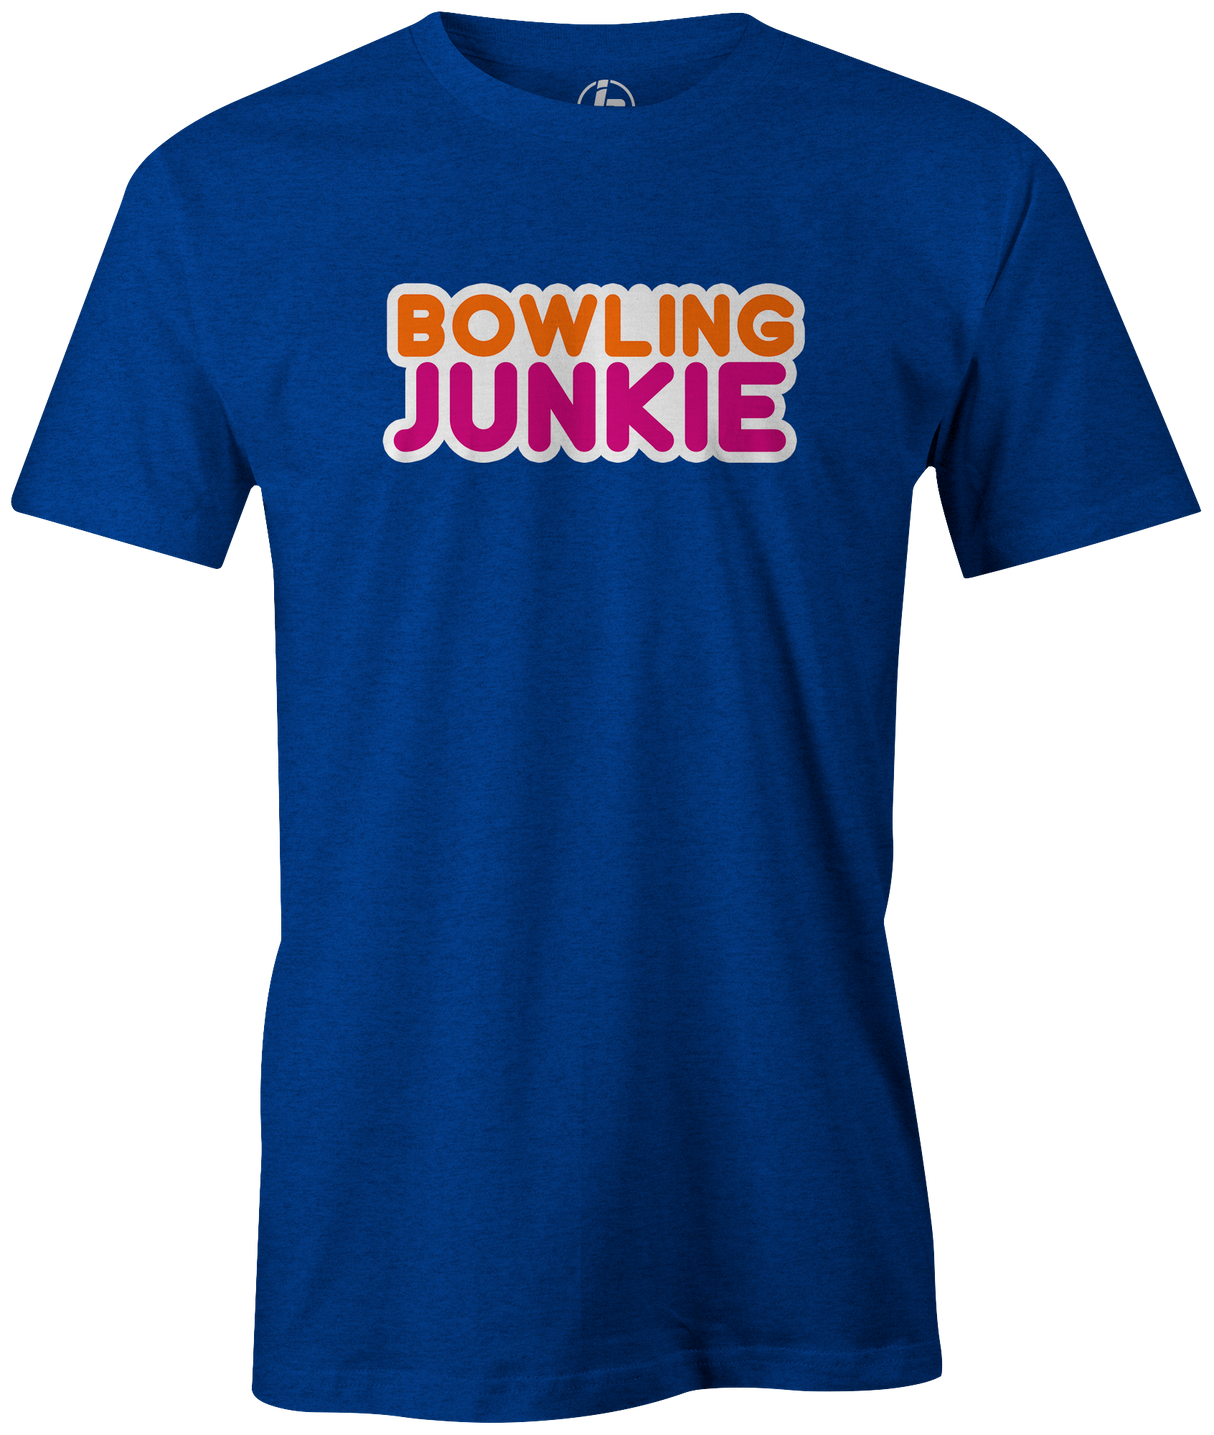 Bowling Junkie It's addicting and you don't care who knows you love bowling! Dunkin Donuts and coffee Gather up your friends, snag this cool t-shirt and hit the lanes for a fun night out! This shirt is also the perfect gift for anyone who loves to bowl! League bowling tshirt, Team shirt, T-shirt, tee-shirt, tshirt. Novelty. Funny t-shirt. BLue